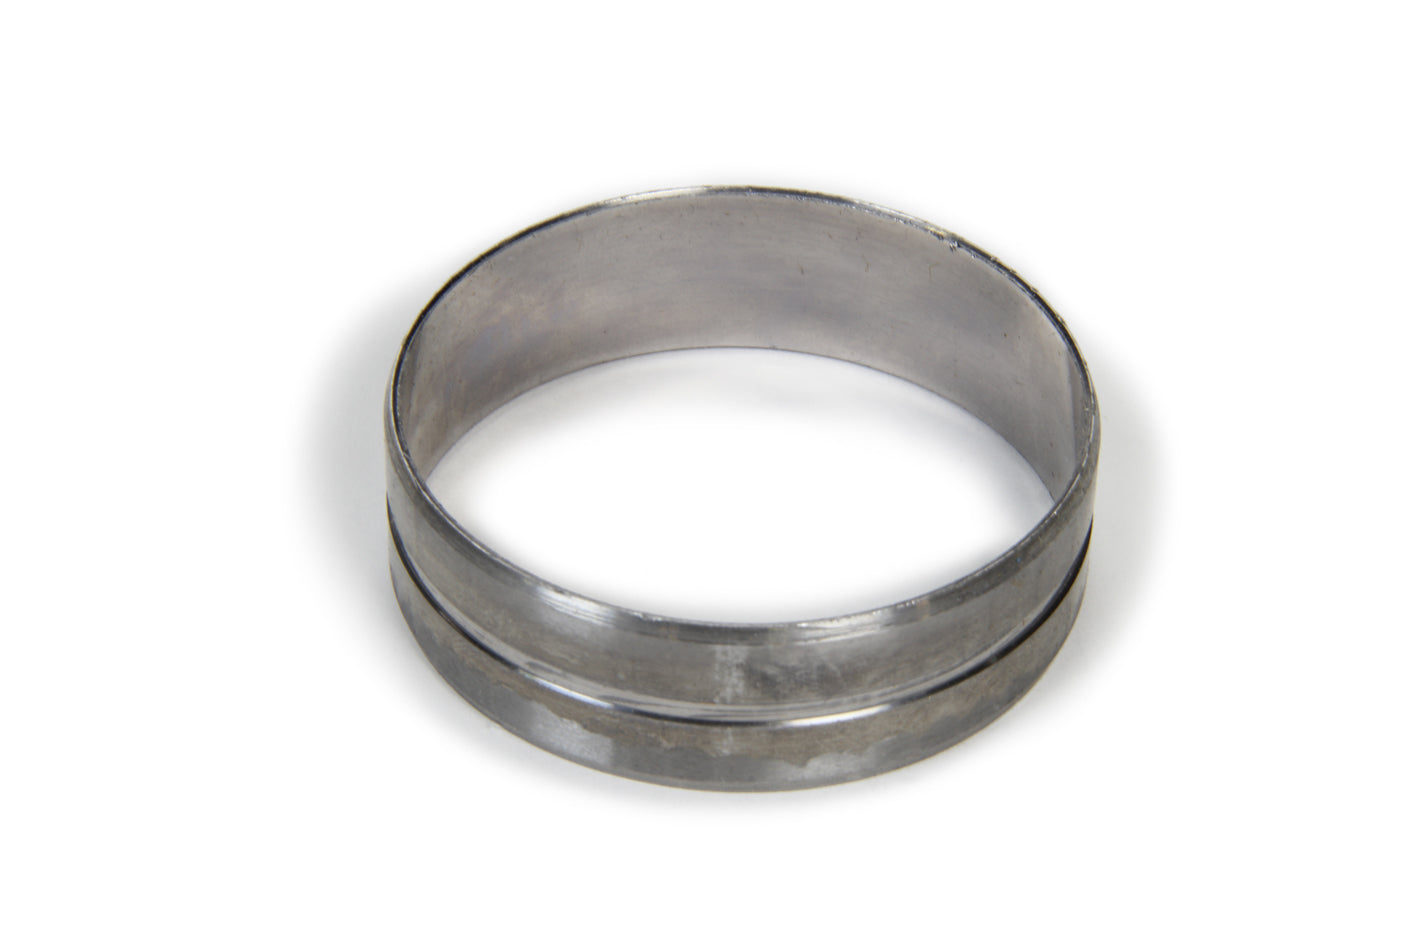 Dura-Bond 60mm Cam Bearing (1pk) OD Grooved w/No Oil Hole DURPN2250-1